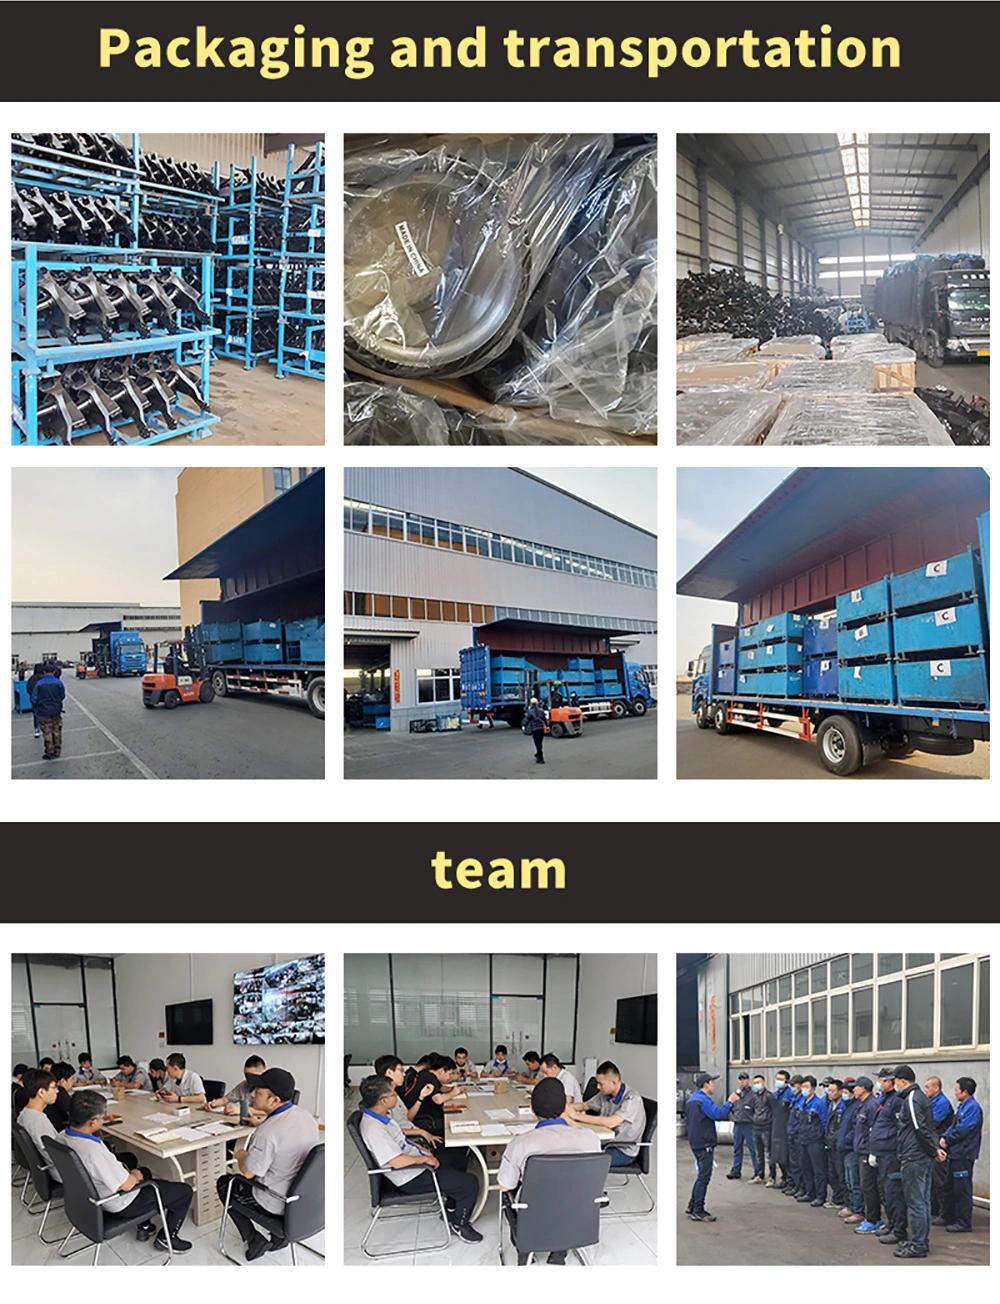 Iron Casting Parts Truck Parts Stamping Parts Ductile Iron Laser Cutting Service Sand Casting Parts